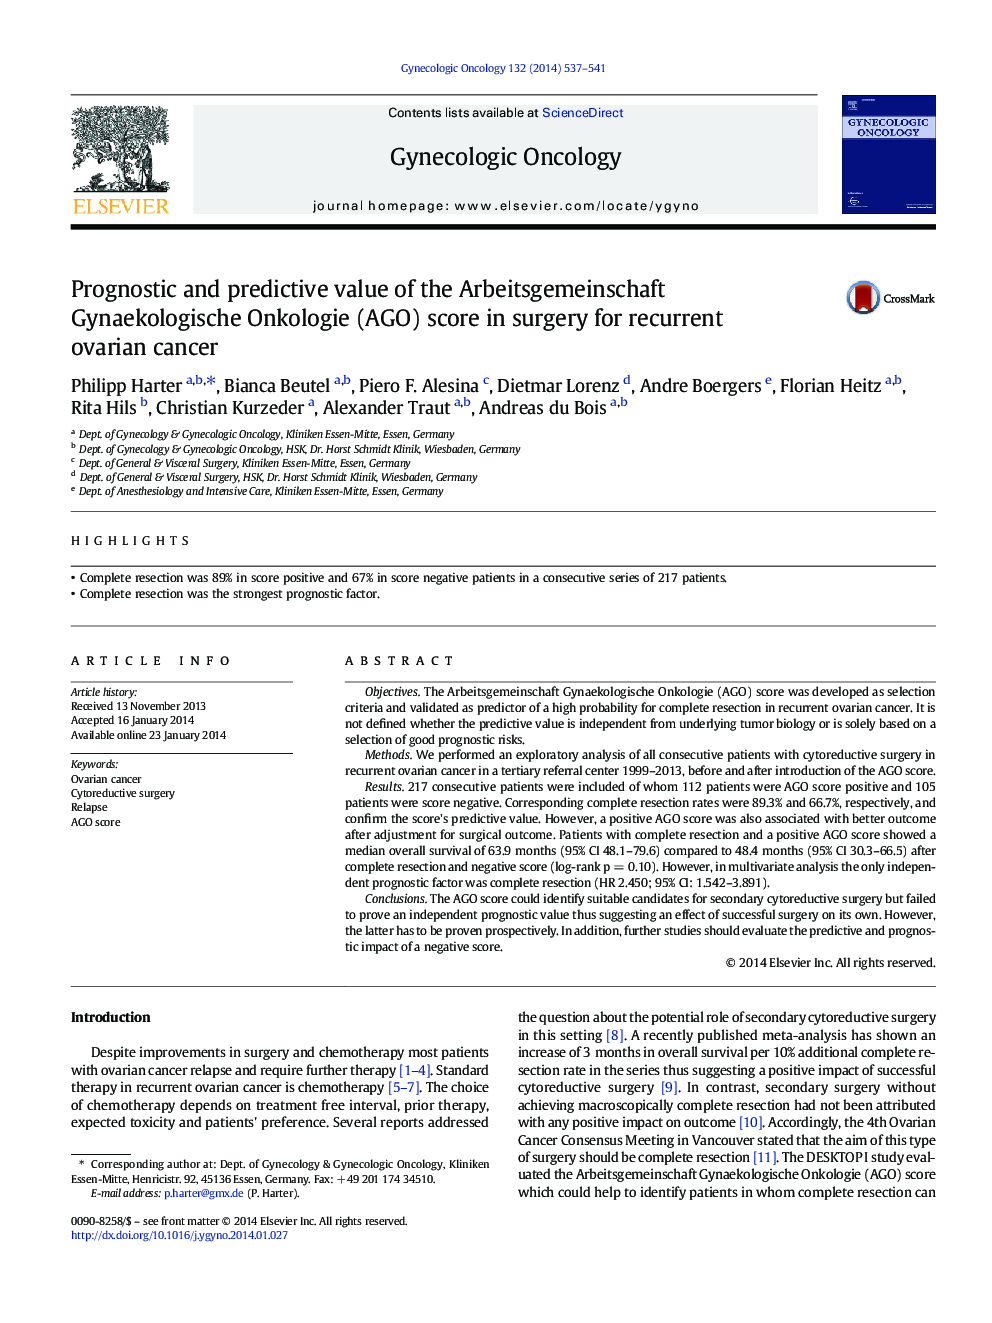 Prognostic and predictive value of the Arbeitsgemeinschaft Gynaekologische Onkologie (AGO) score in surgery for recurrent ovarian cancer